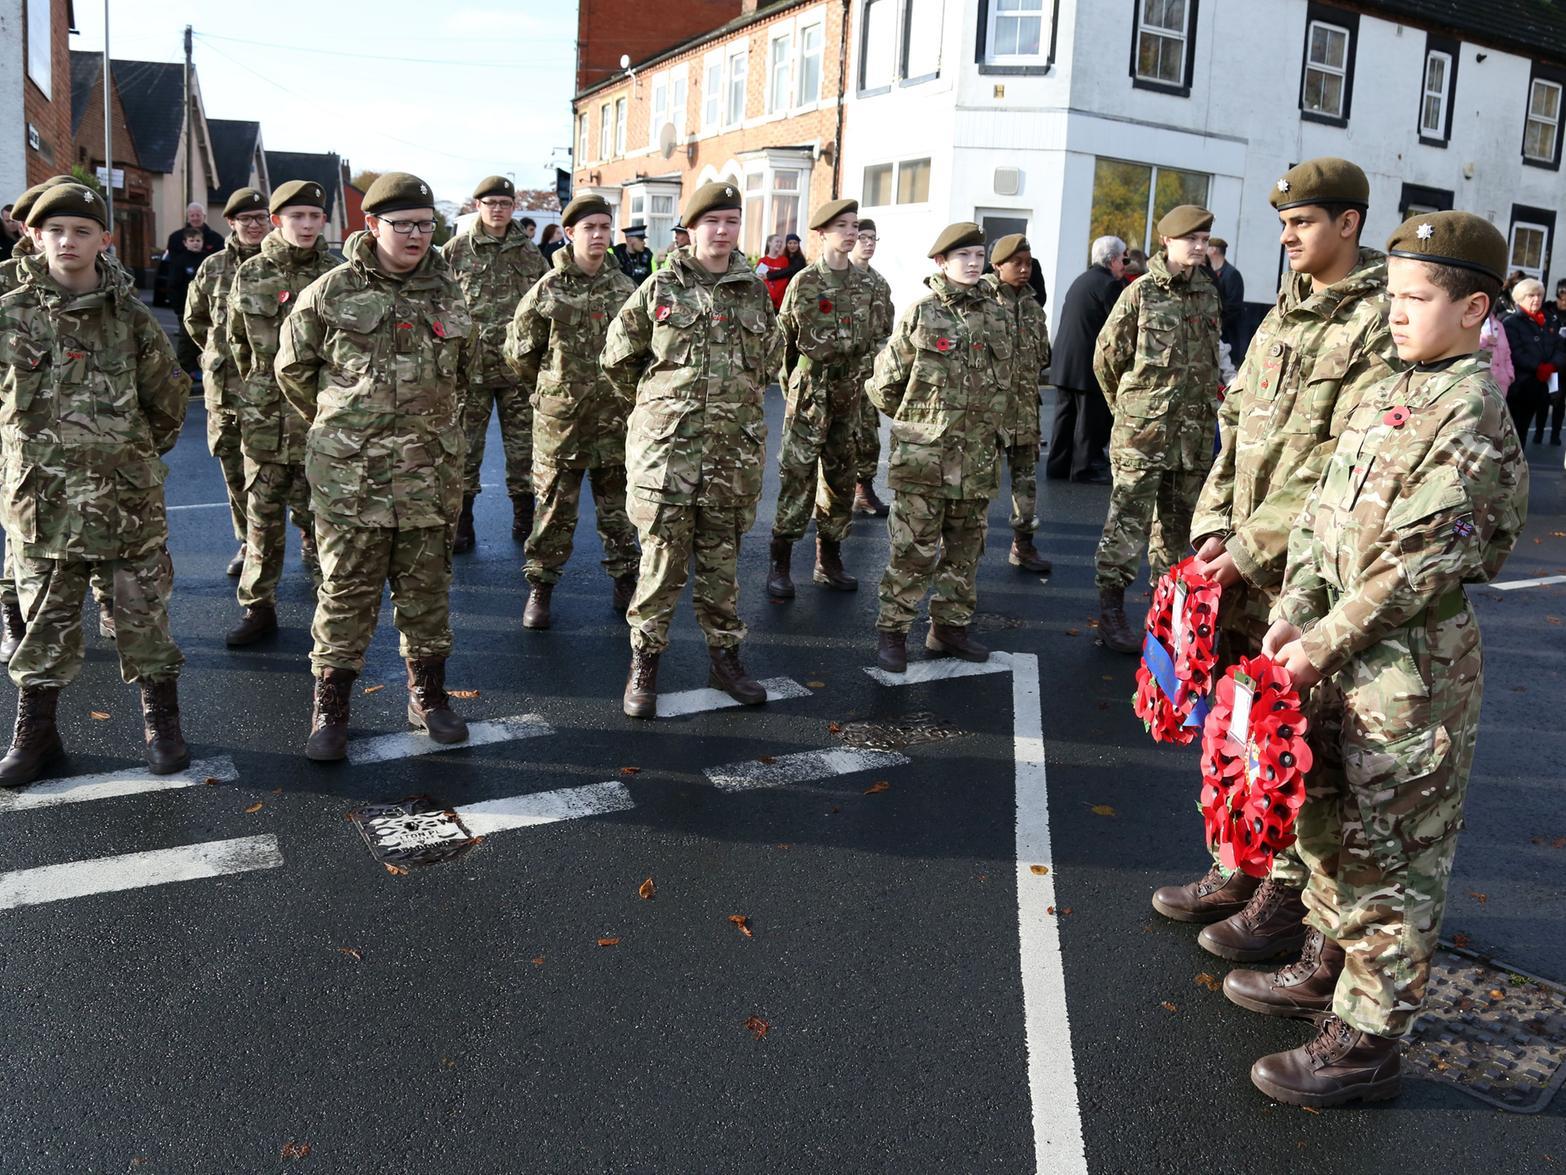 Sir Christopher Hatton Academy's  newly formed Combined Cadet Force